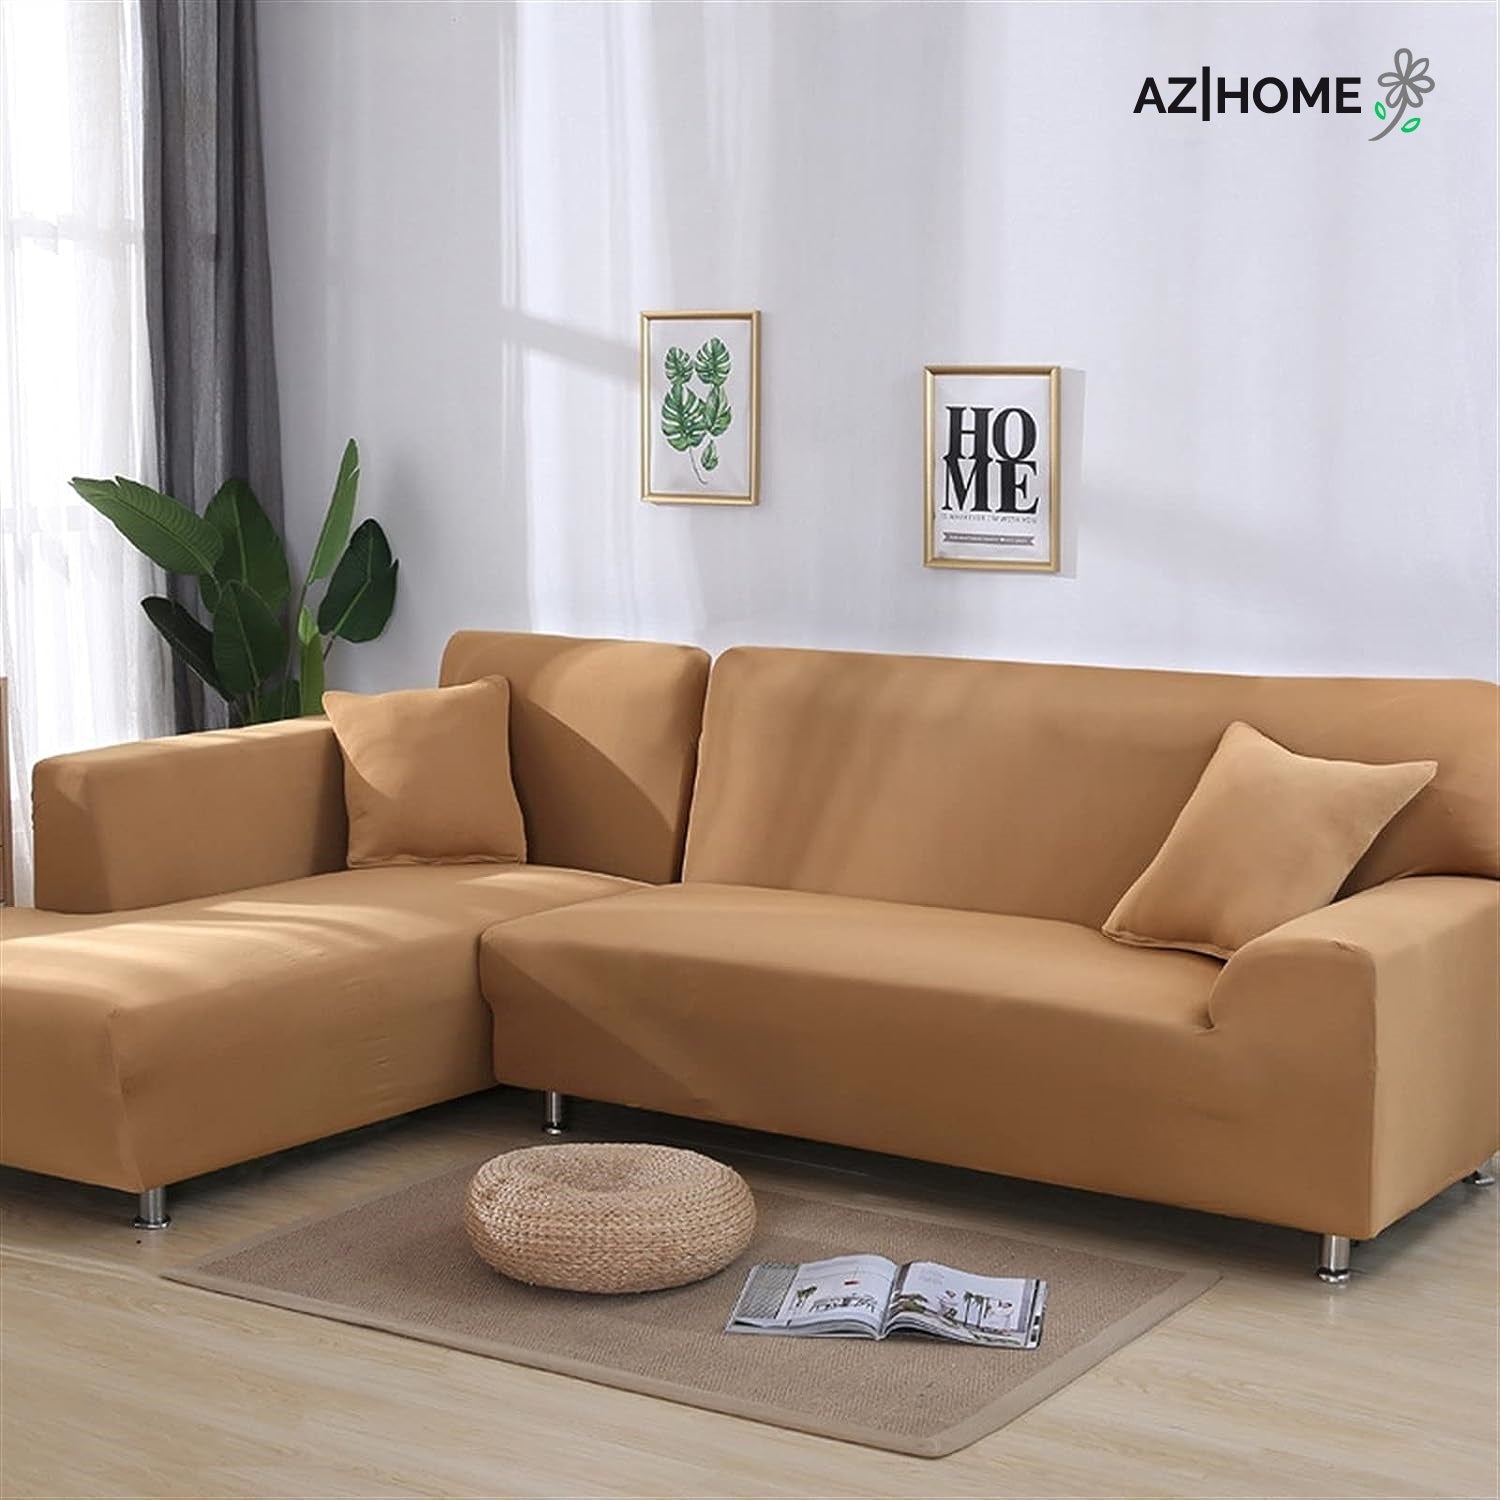 L Shape Jersey Sofa Cover-Camel Brown